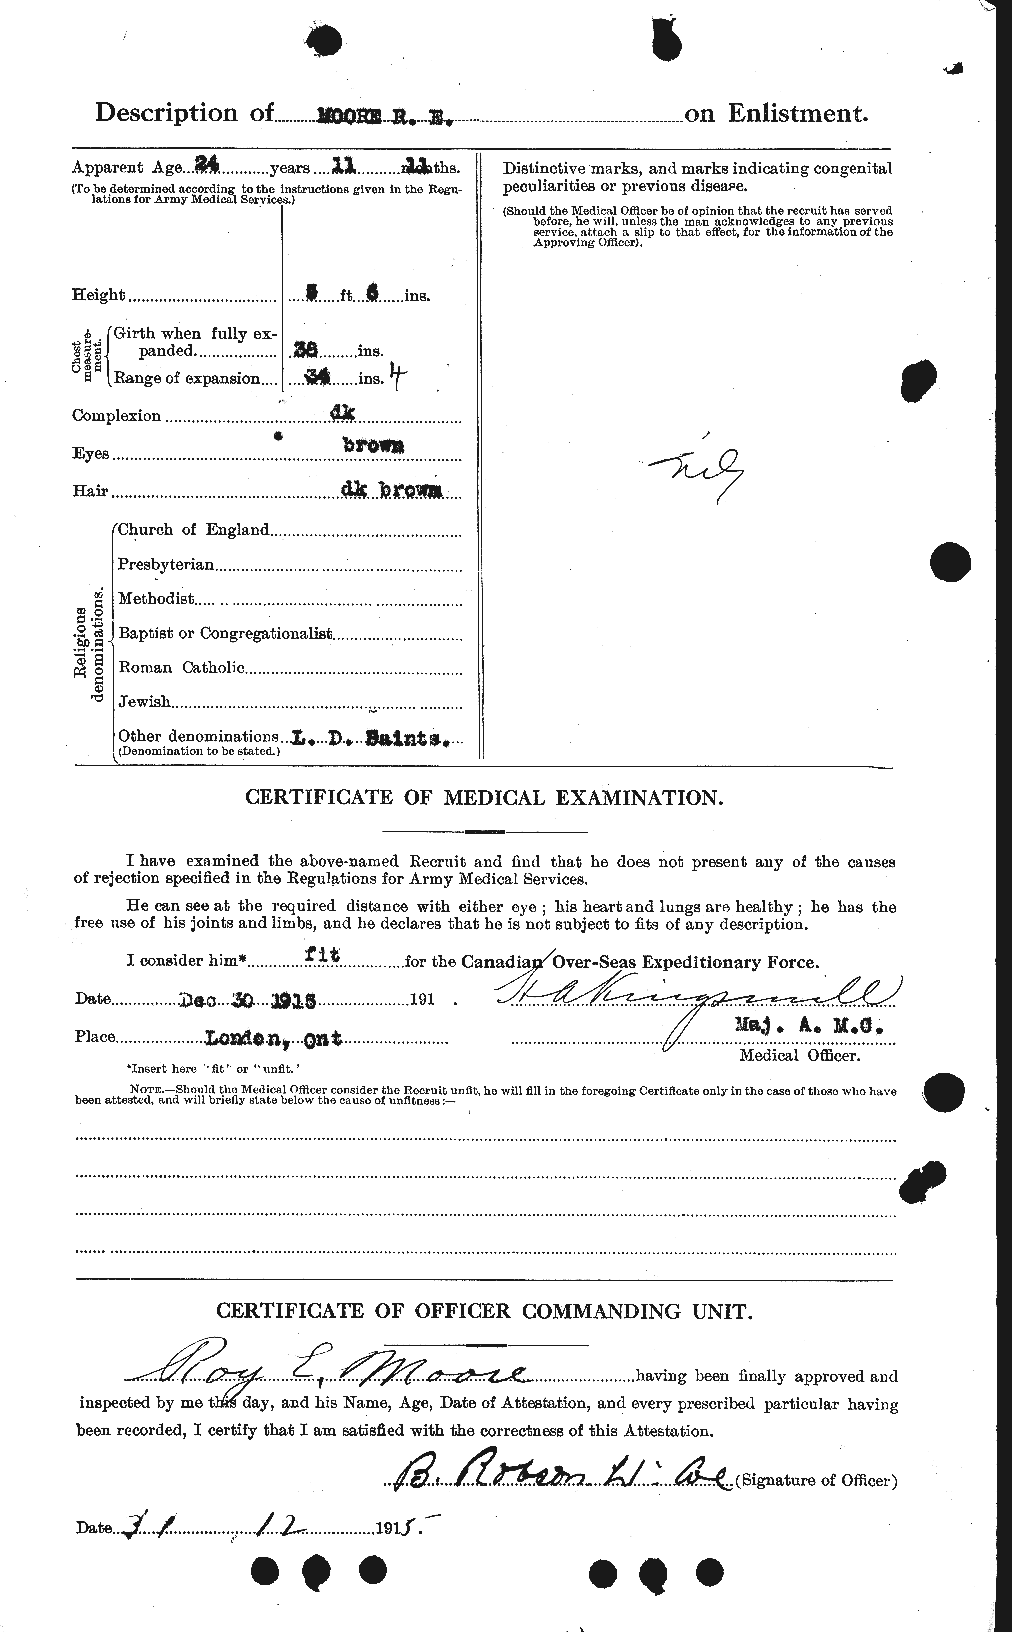 Personnel Records of the First World War - CEF 503598b